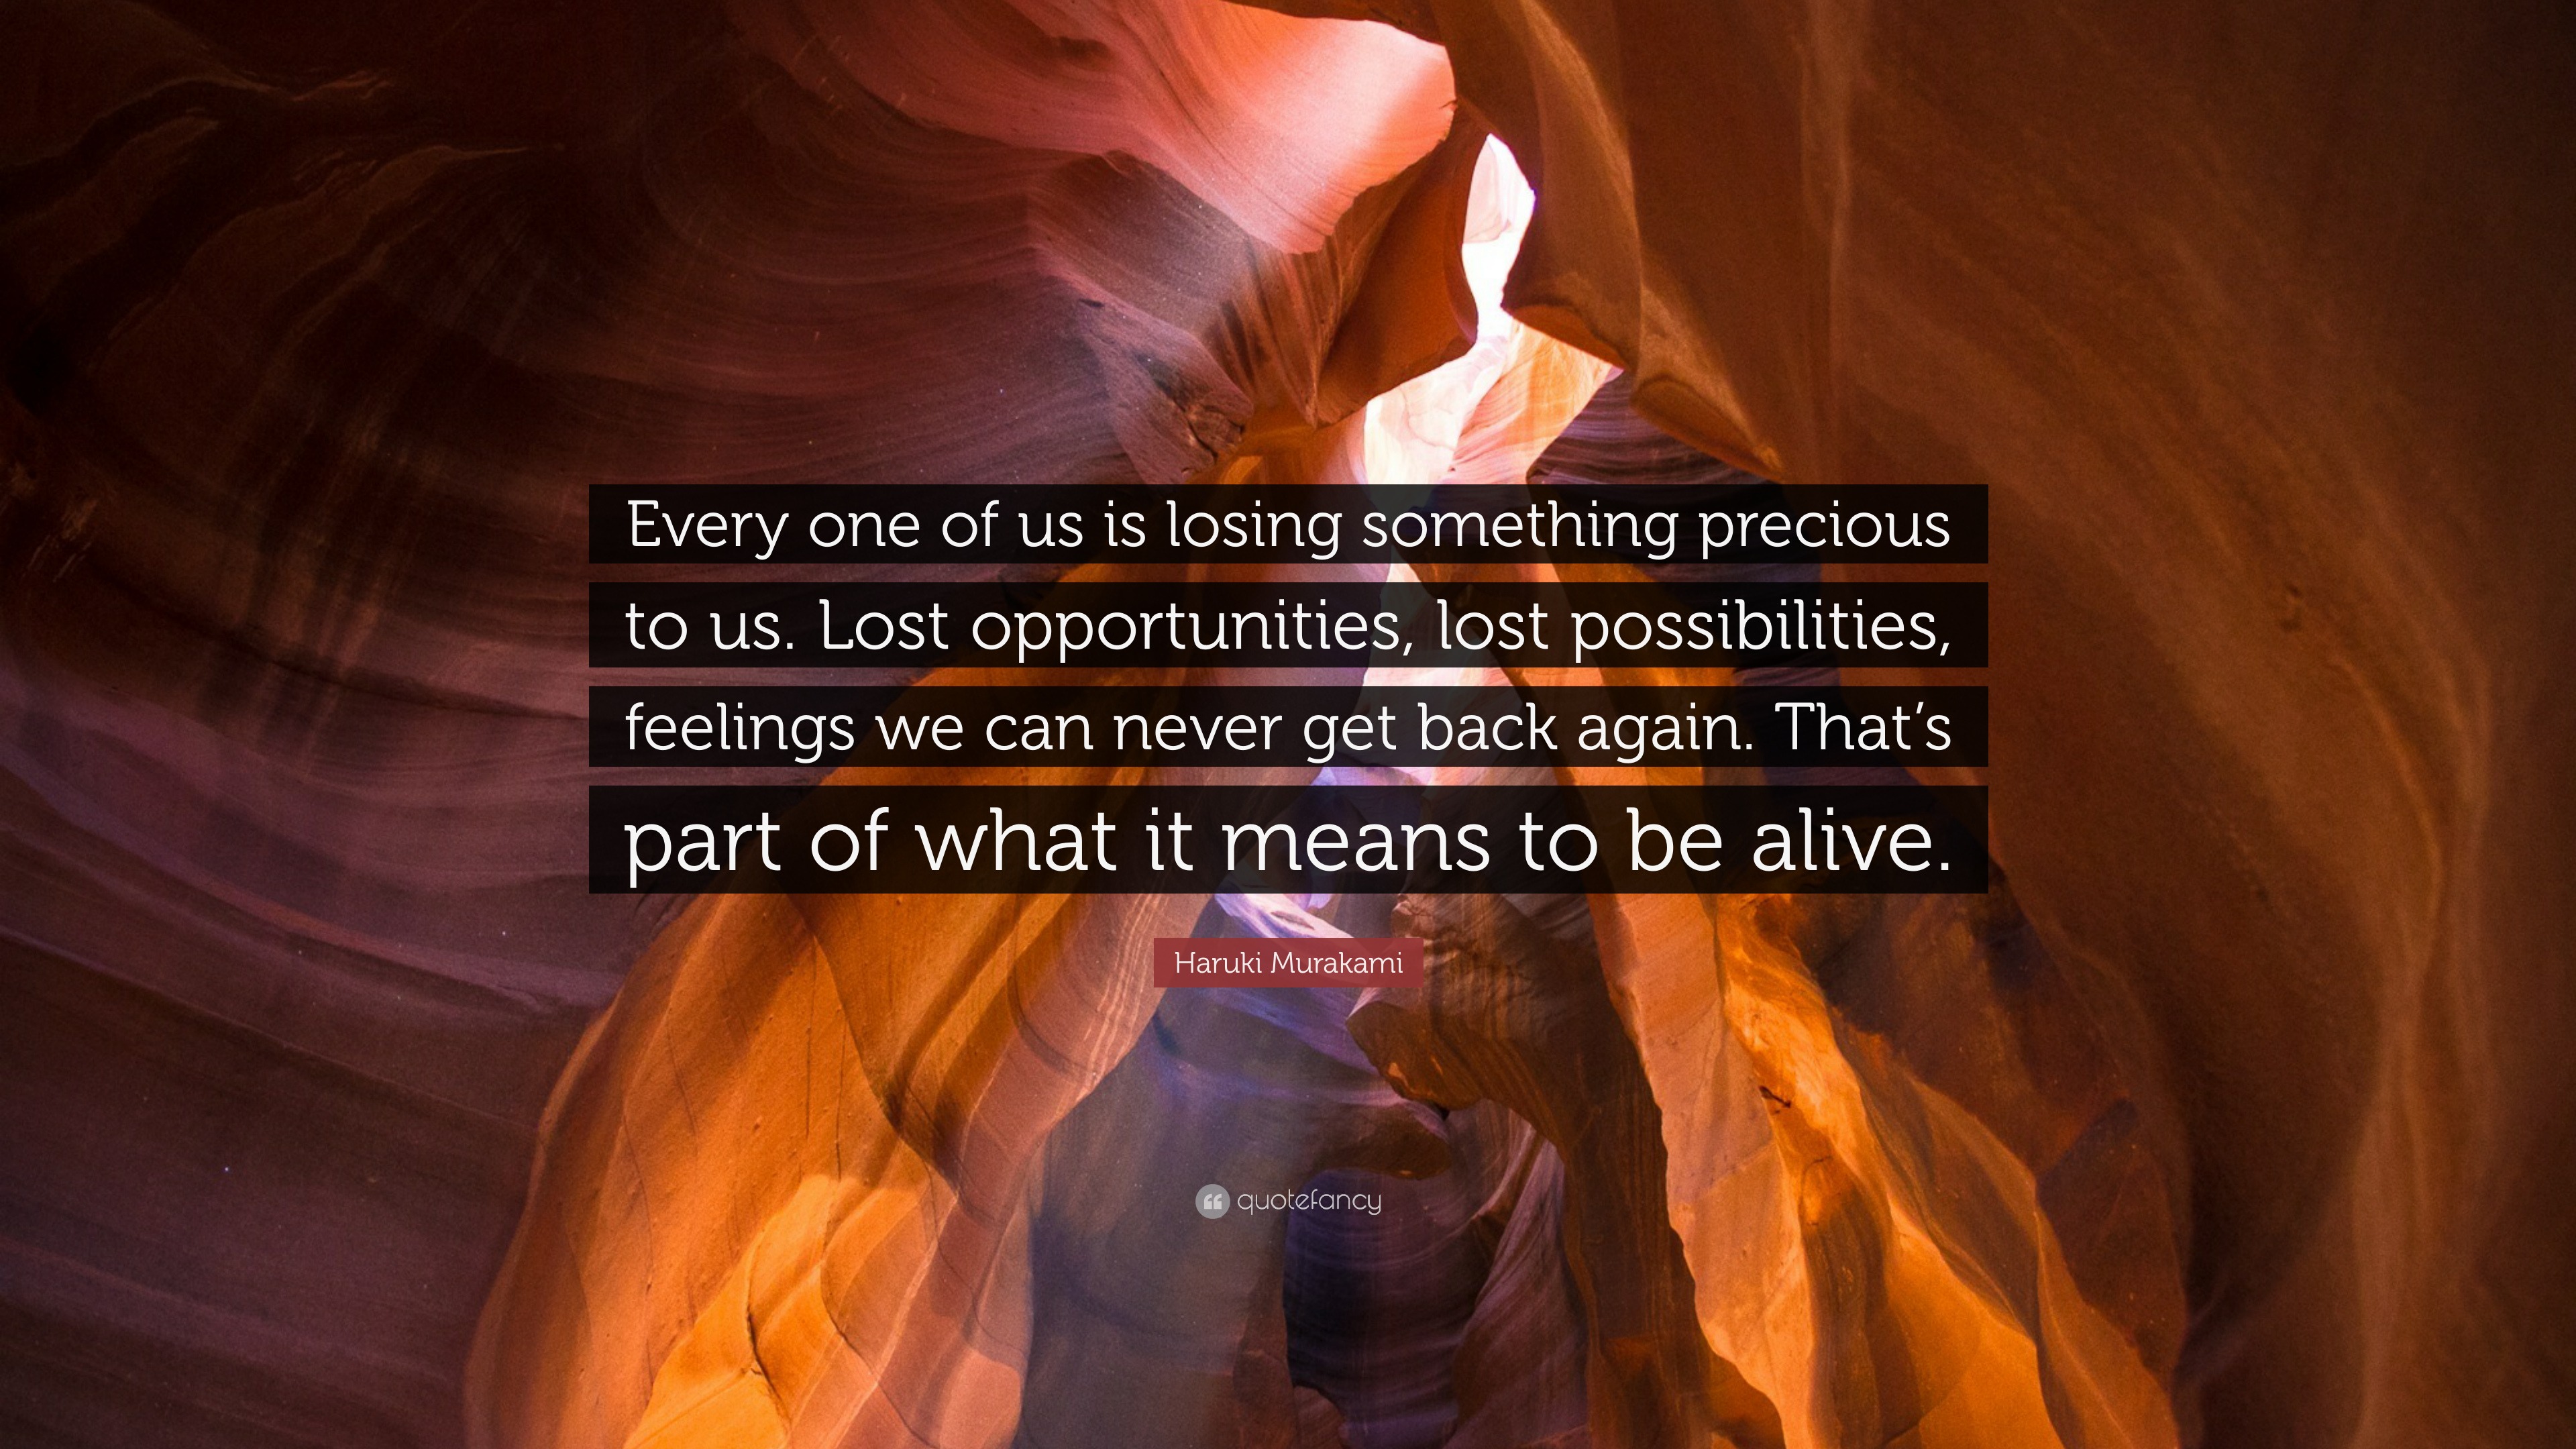 Haruki Murakami Quote “every One Of Us Is Losing Something Precious To Us Lost Opportunities 